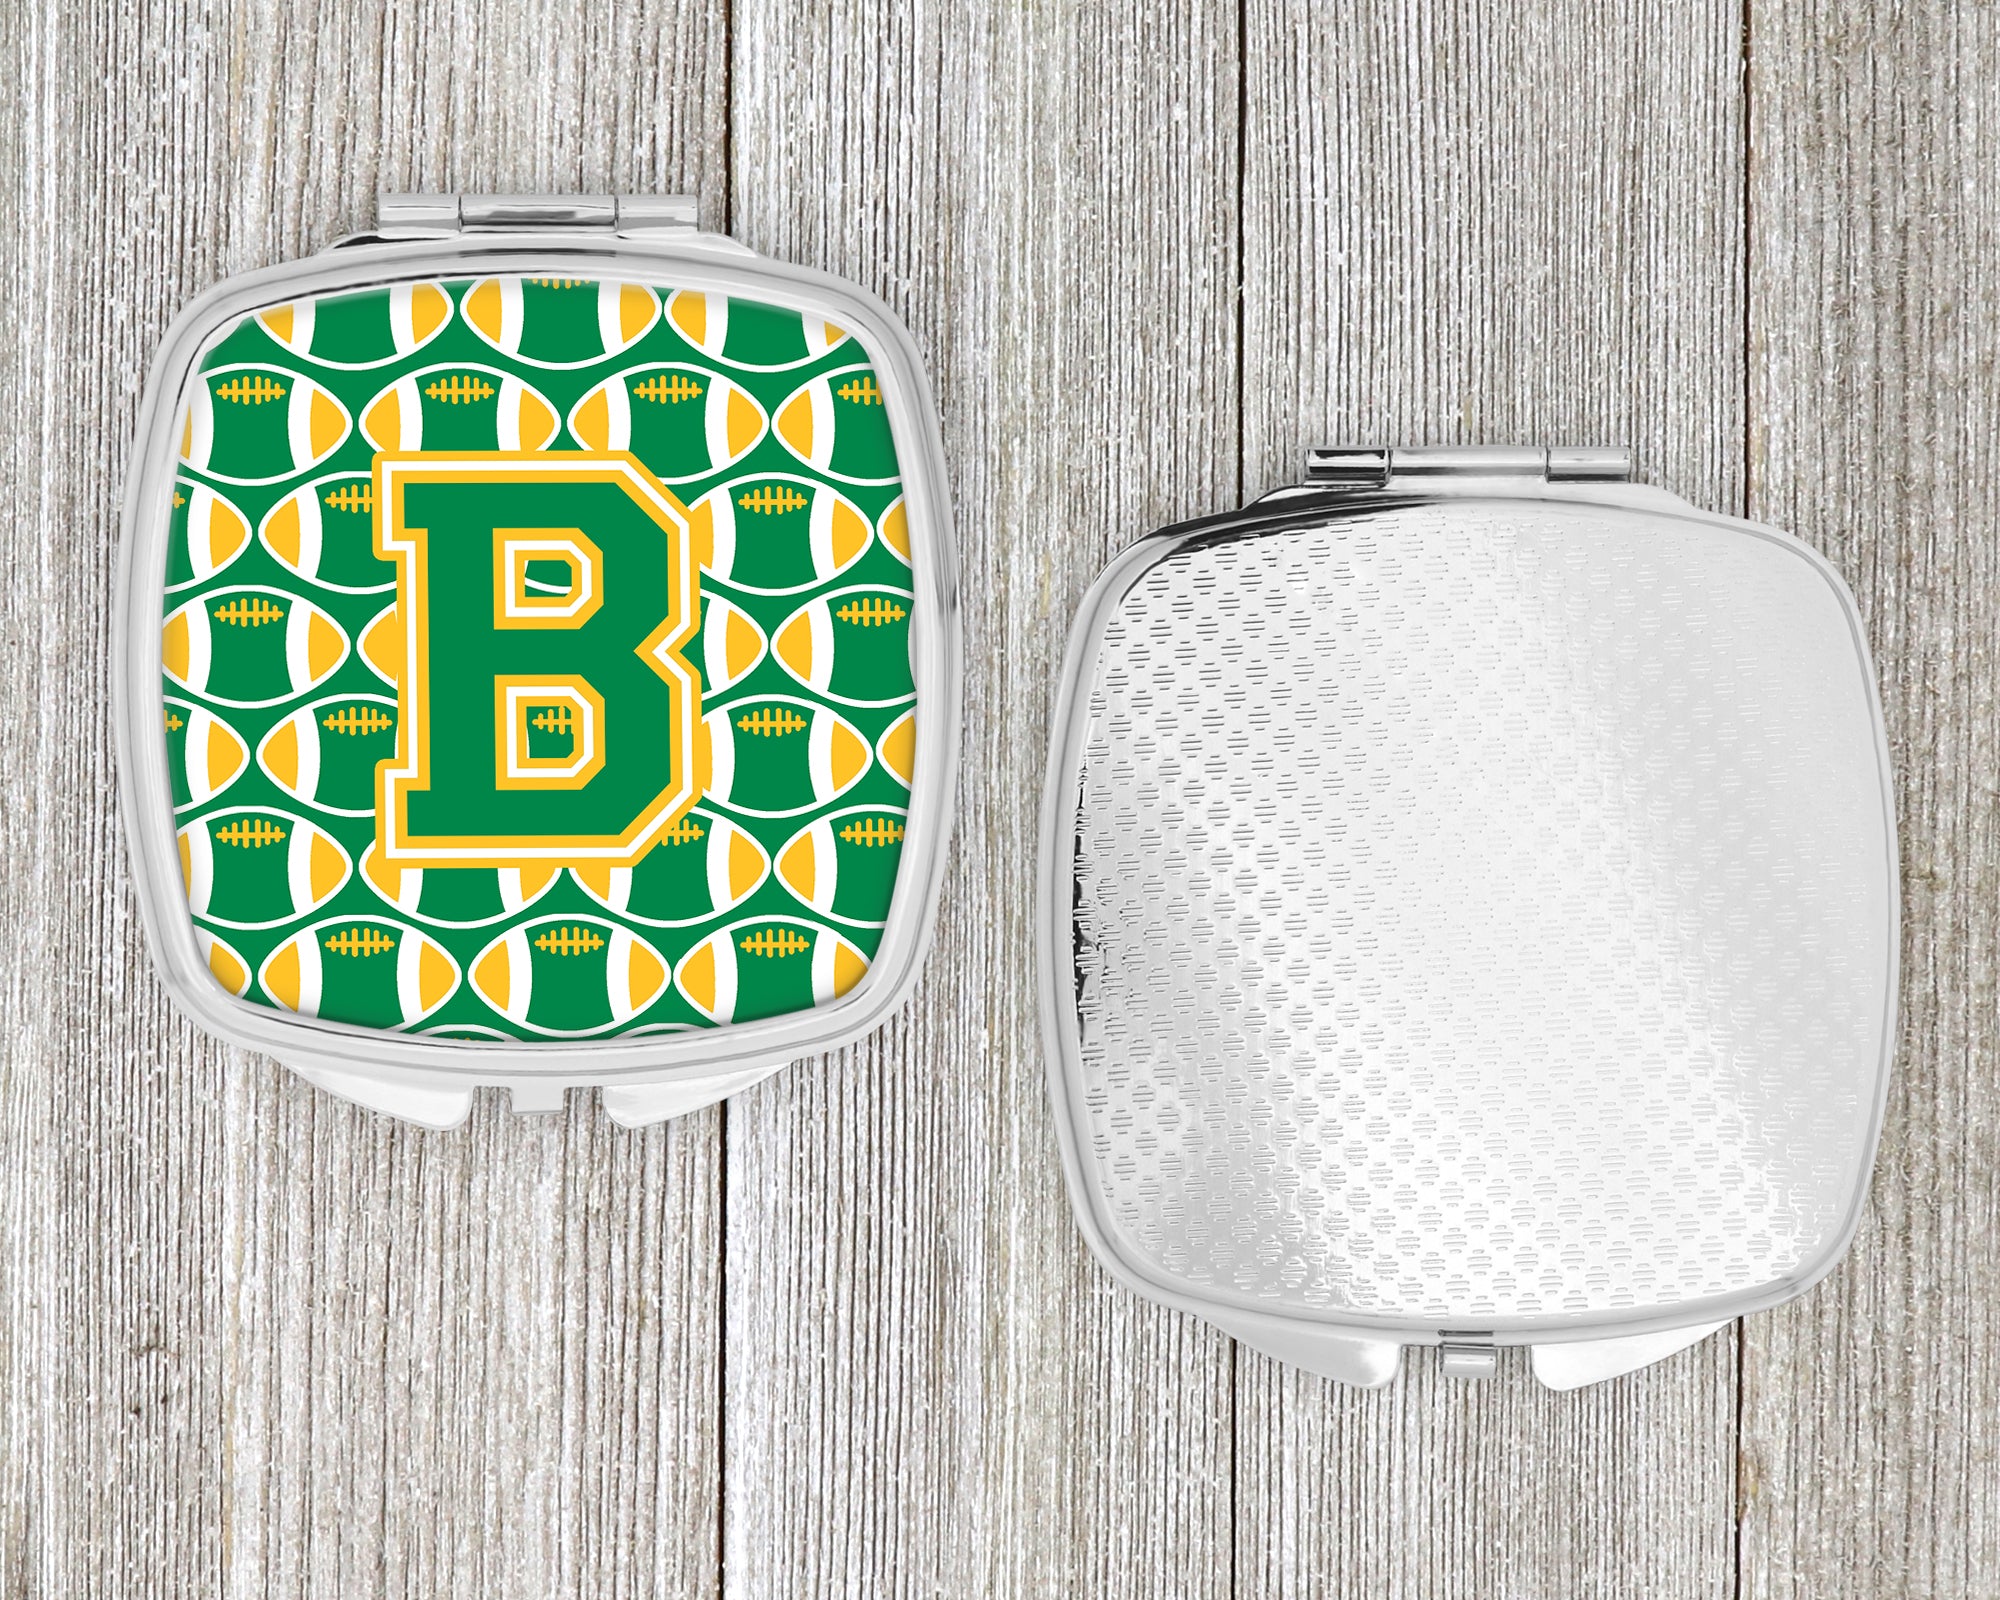 Letter B Football Green and Gold Compact Mirror CJ1069-BSCM  the-store.com.